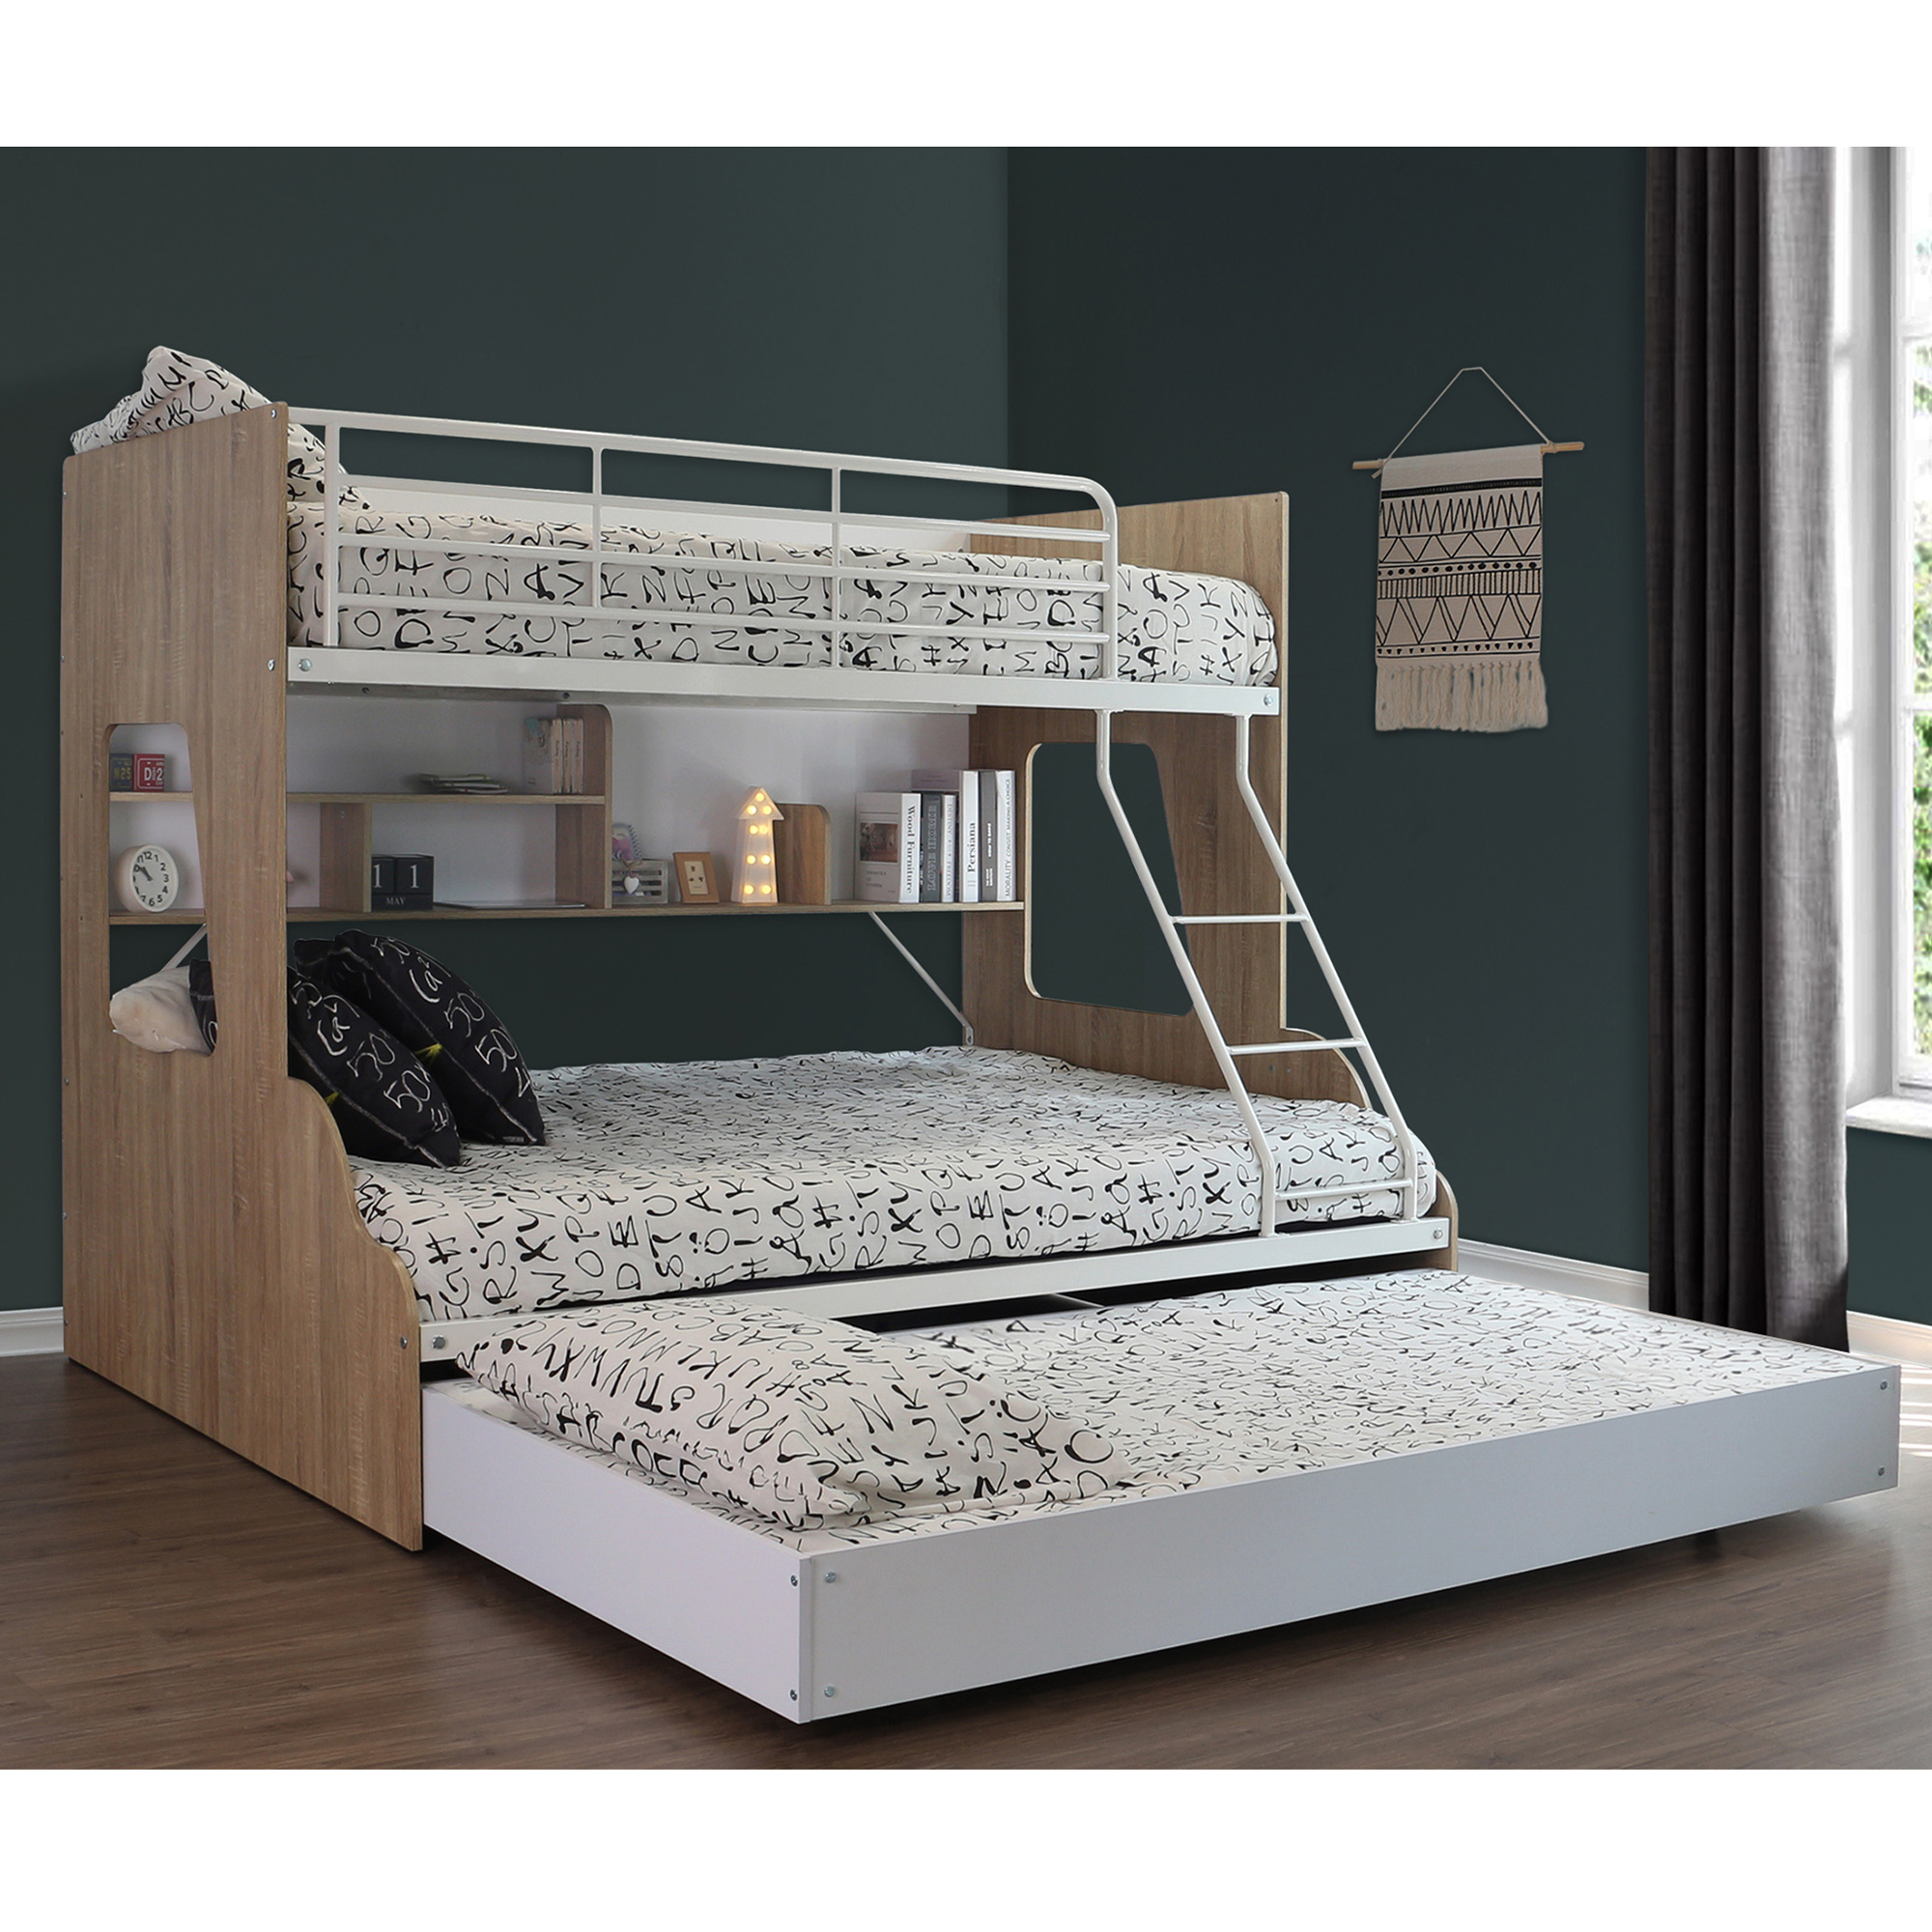 Single Over Double Trio Bunk Bed, Full Single Bunk Beds